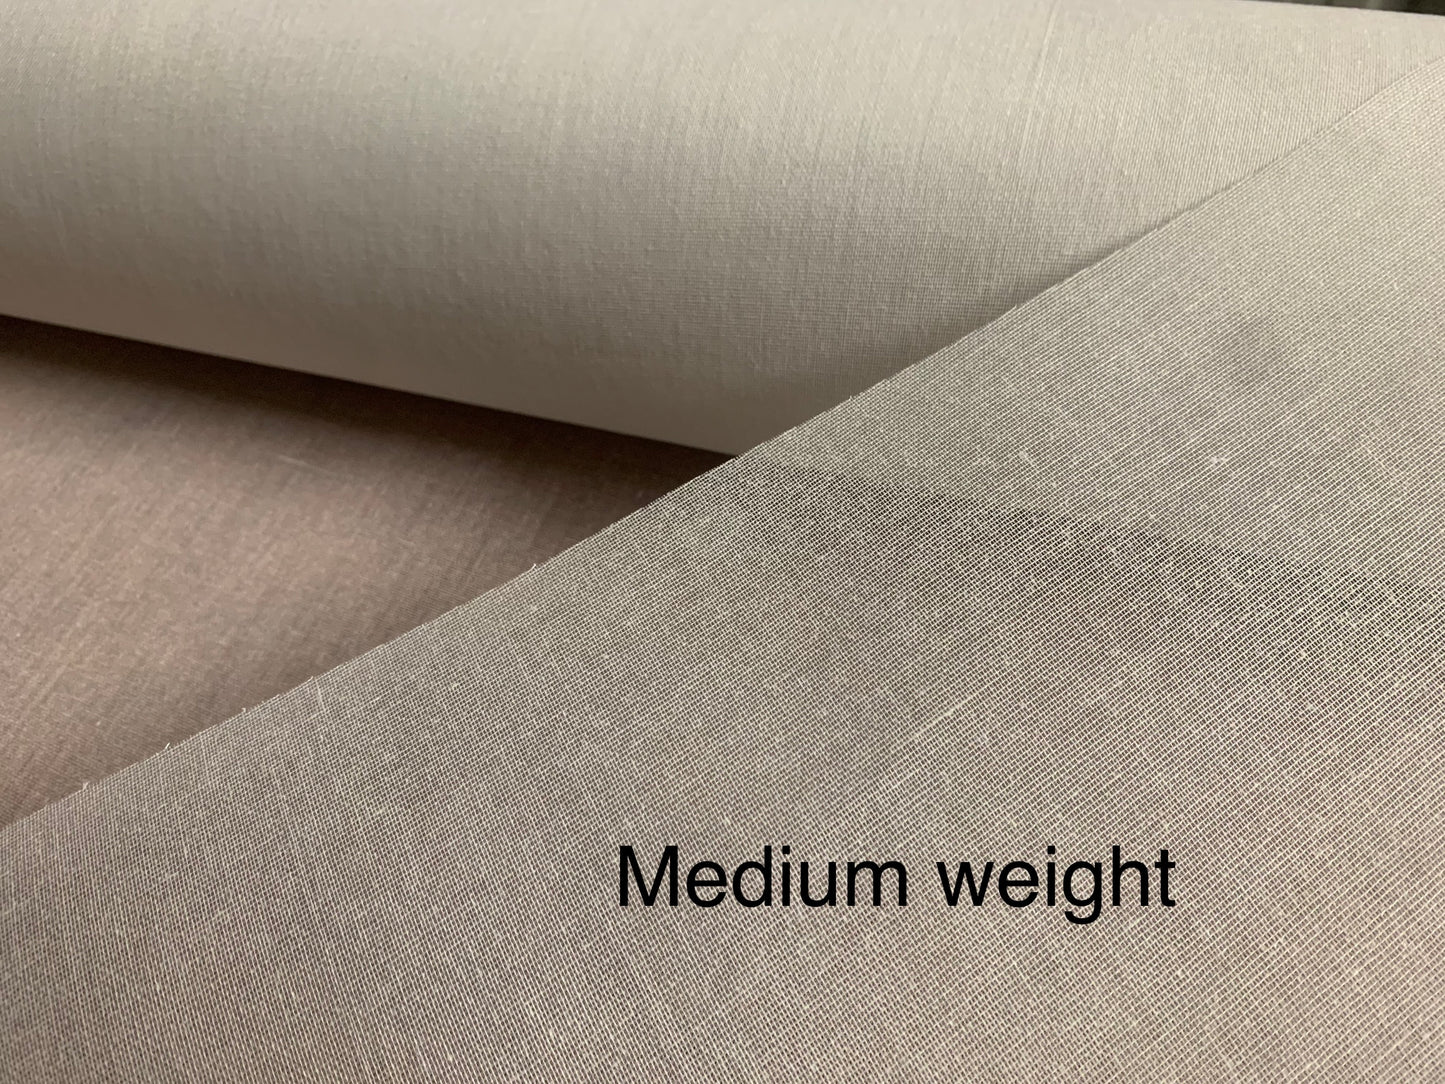 Fusible woven interfacing, iron on interfacing, lightweight interlining for bag and clothes making by the meter